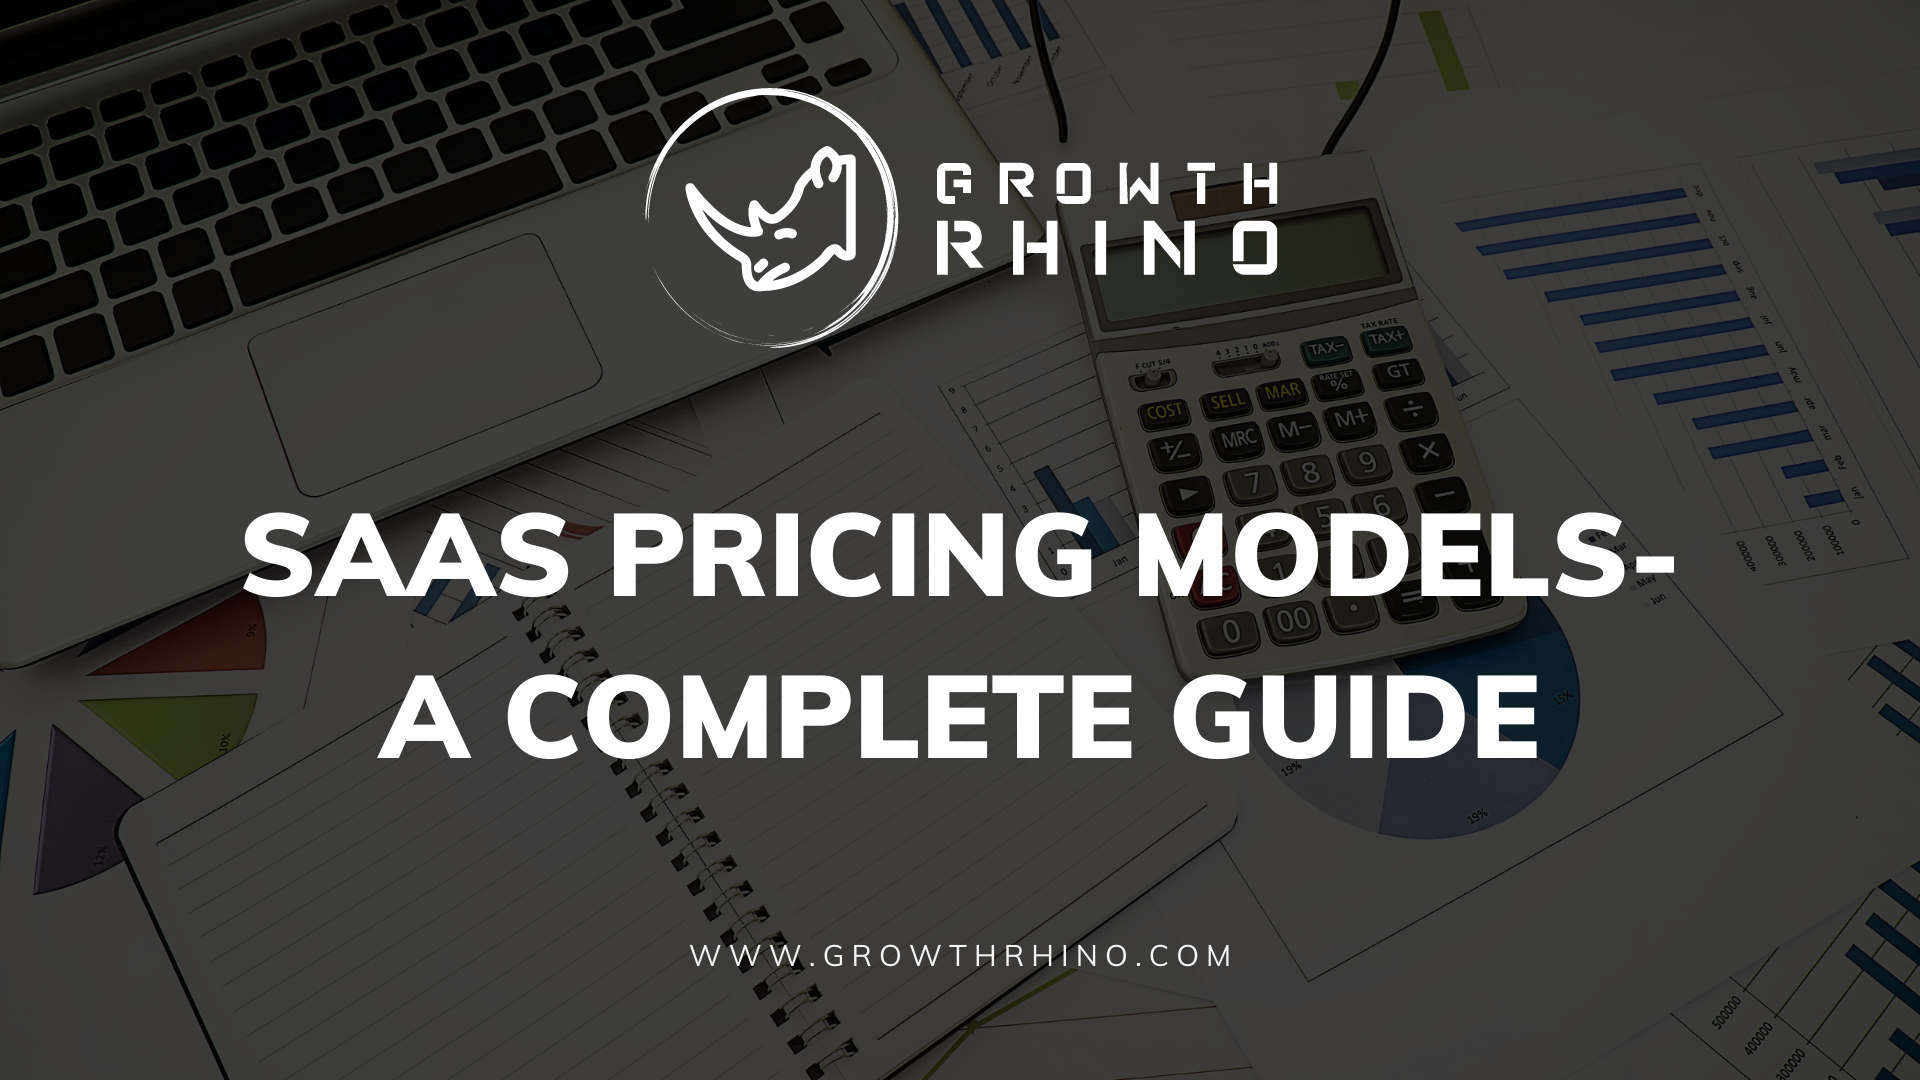 SaaS Pricing Models- A Complete Guide